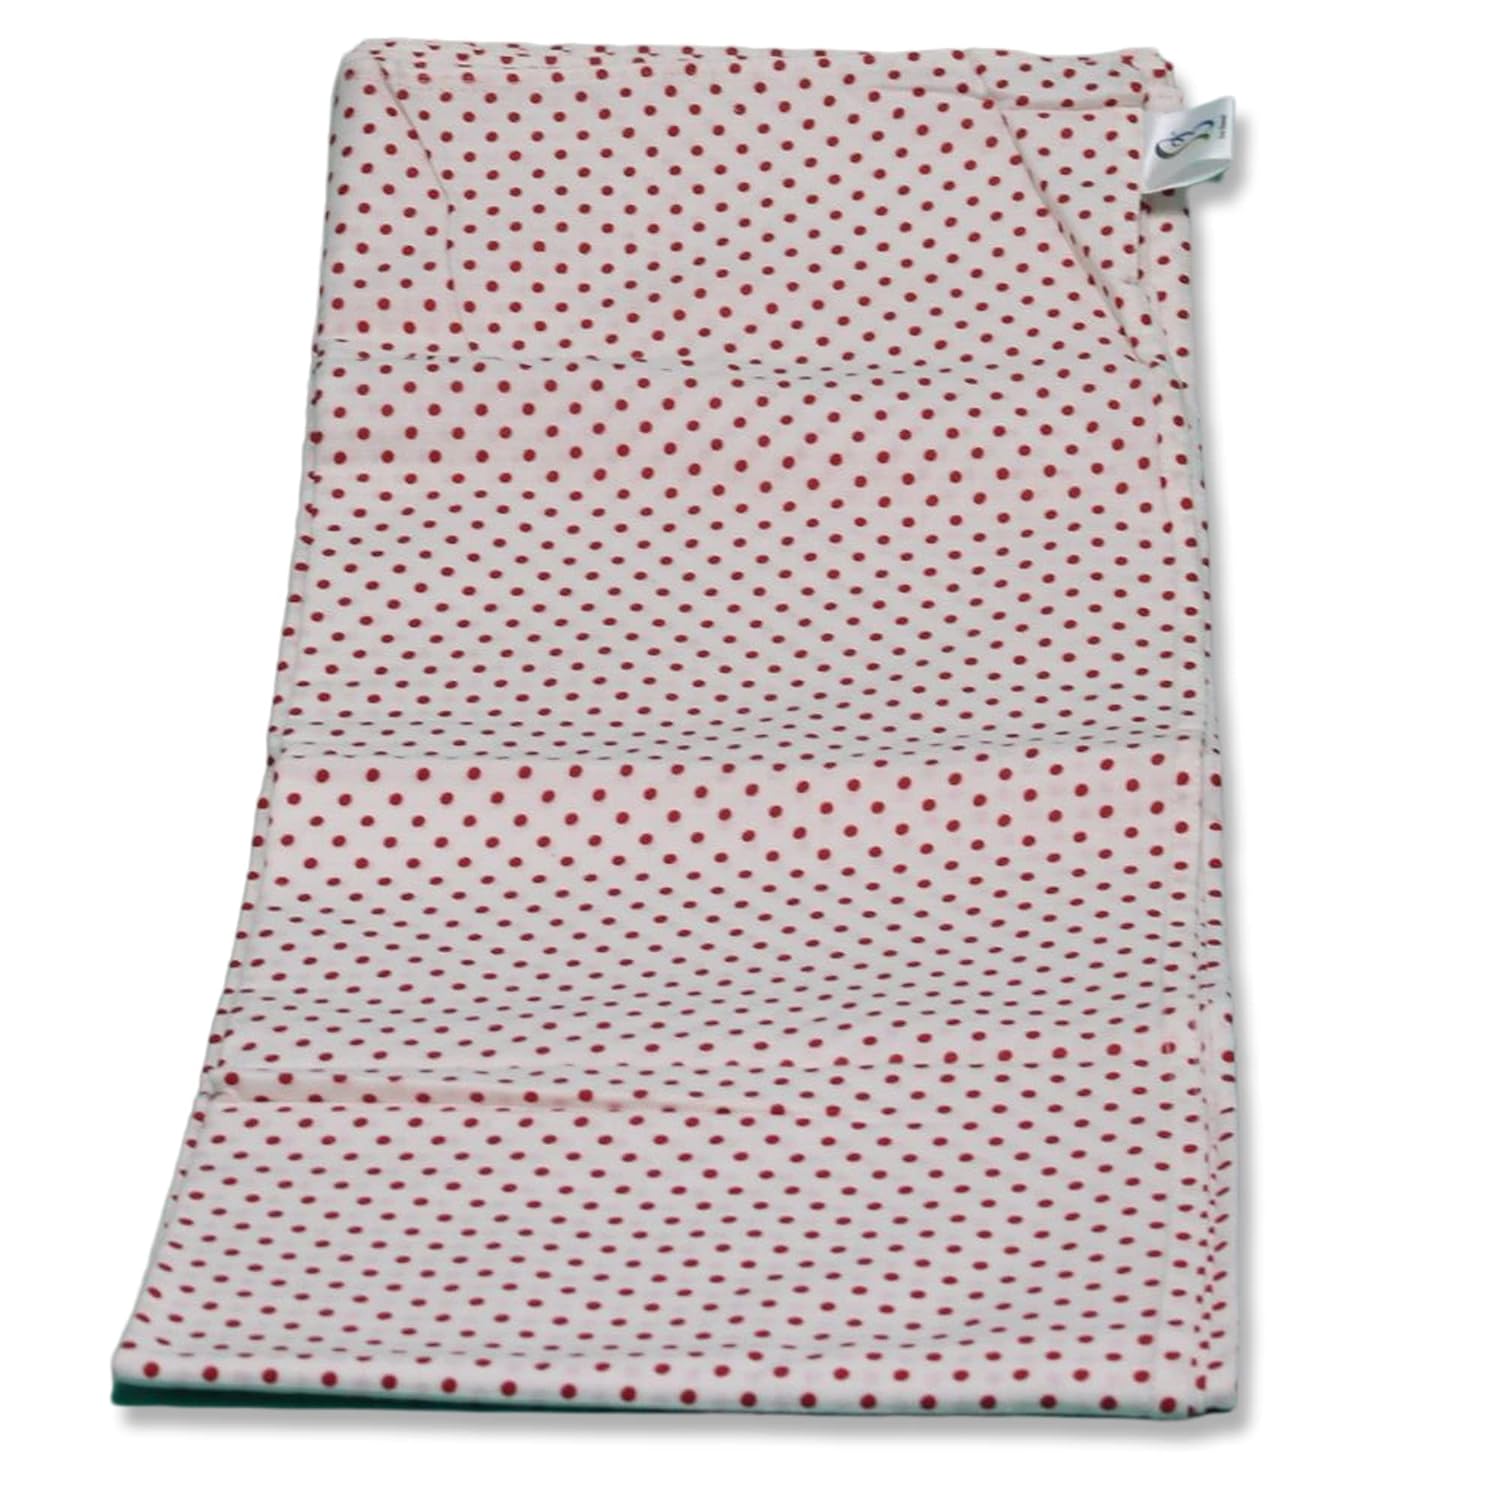 Dots Baby Cradle with Cotton Cloth Useful to 0 to 24 Months, Carrying Capacity 25 kg, with an Easy air Flow